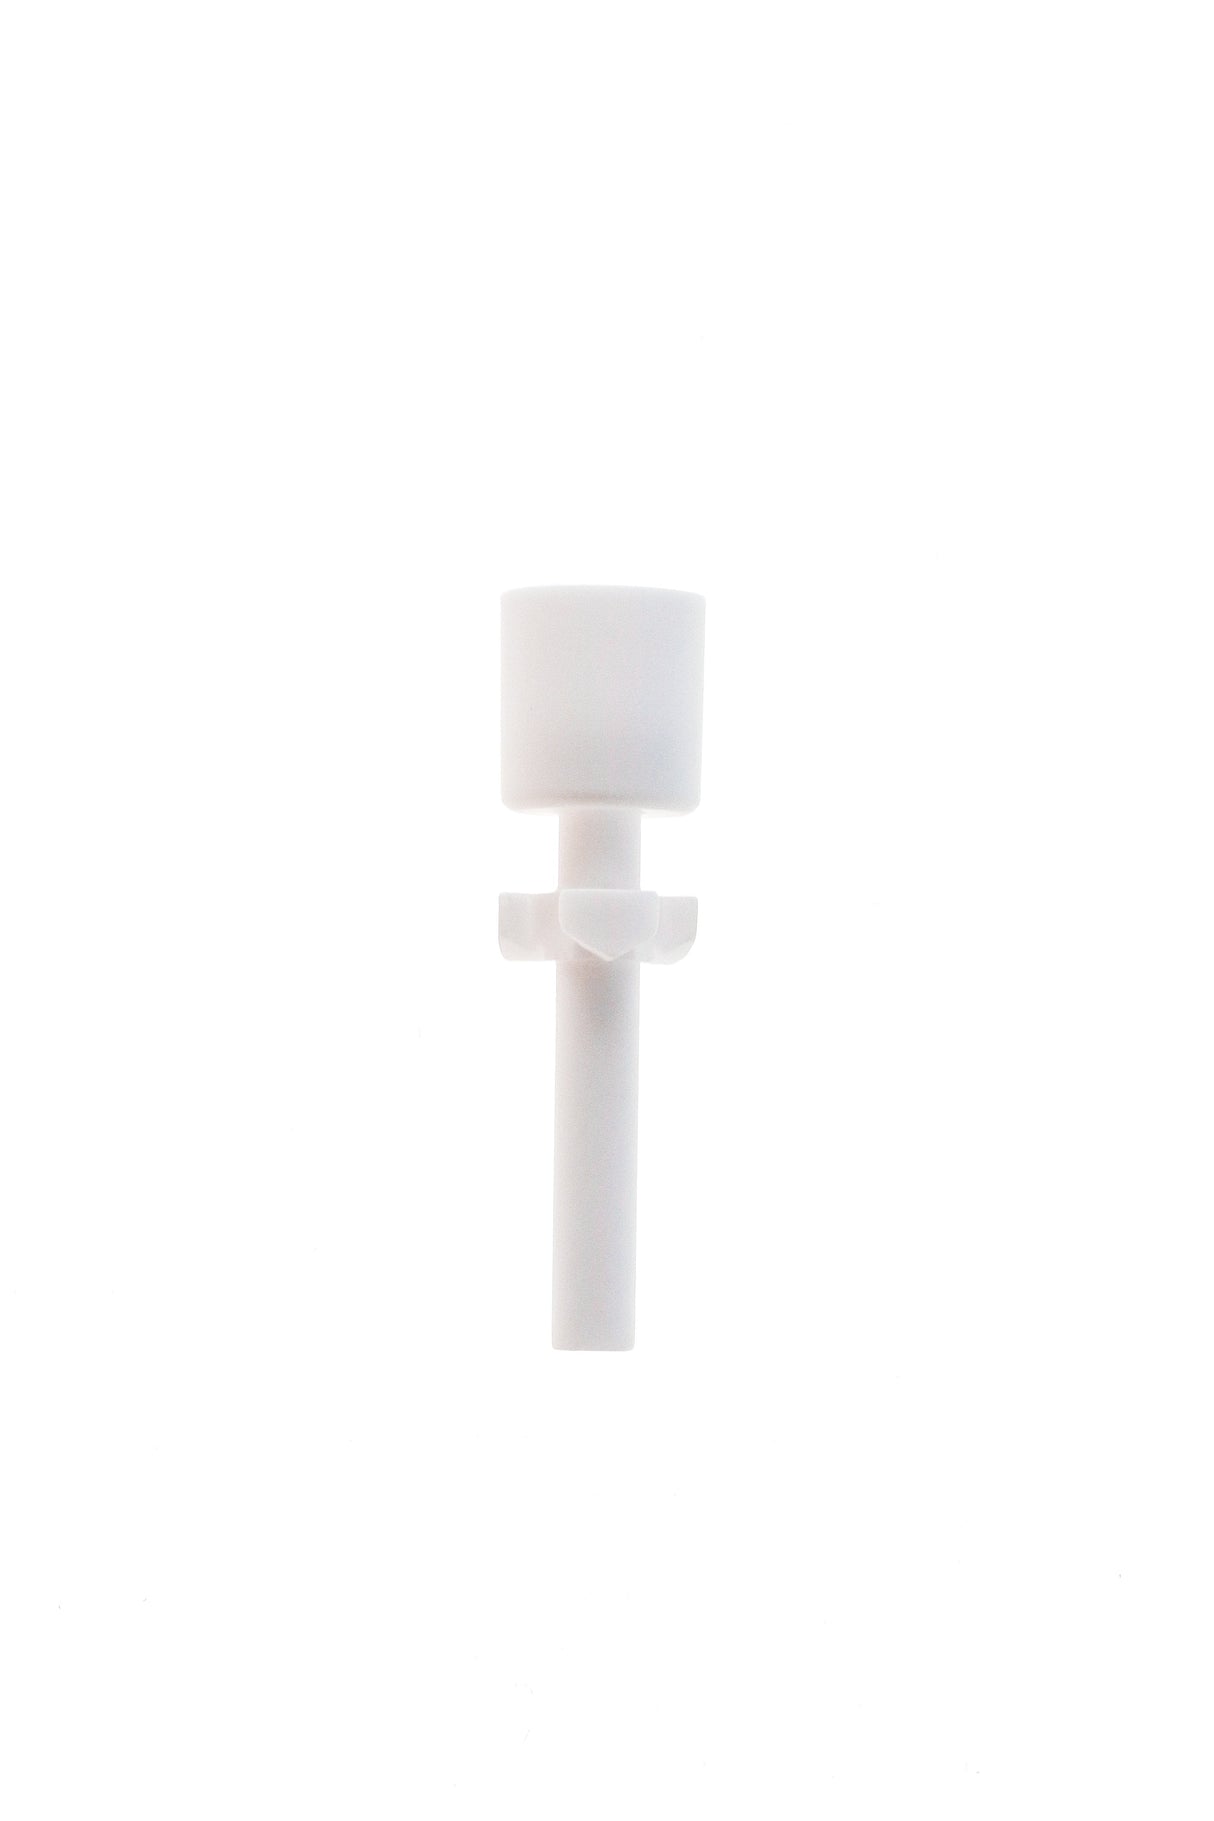 TAG - White Ceramic Nail for Dab Rigs, Front View on Seamless White Background